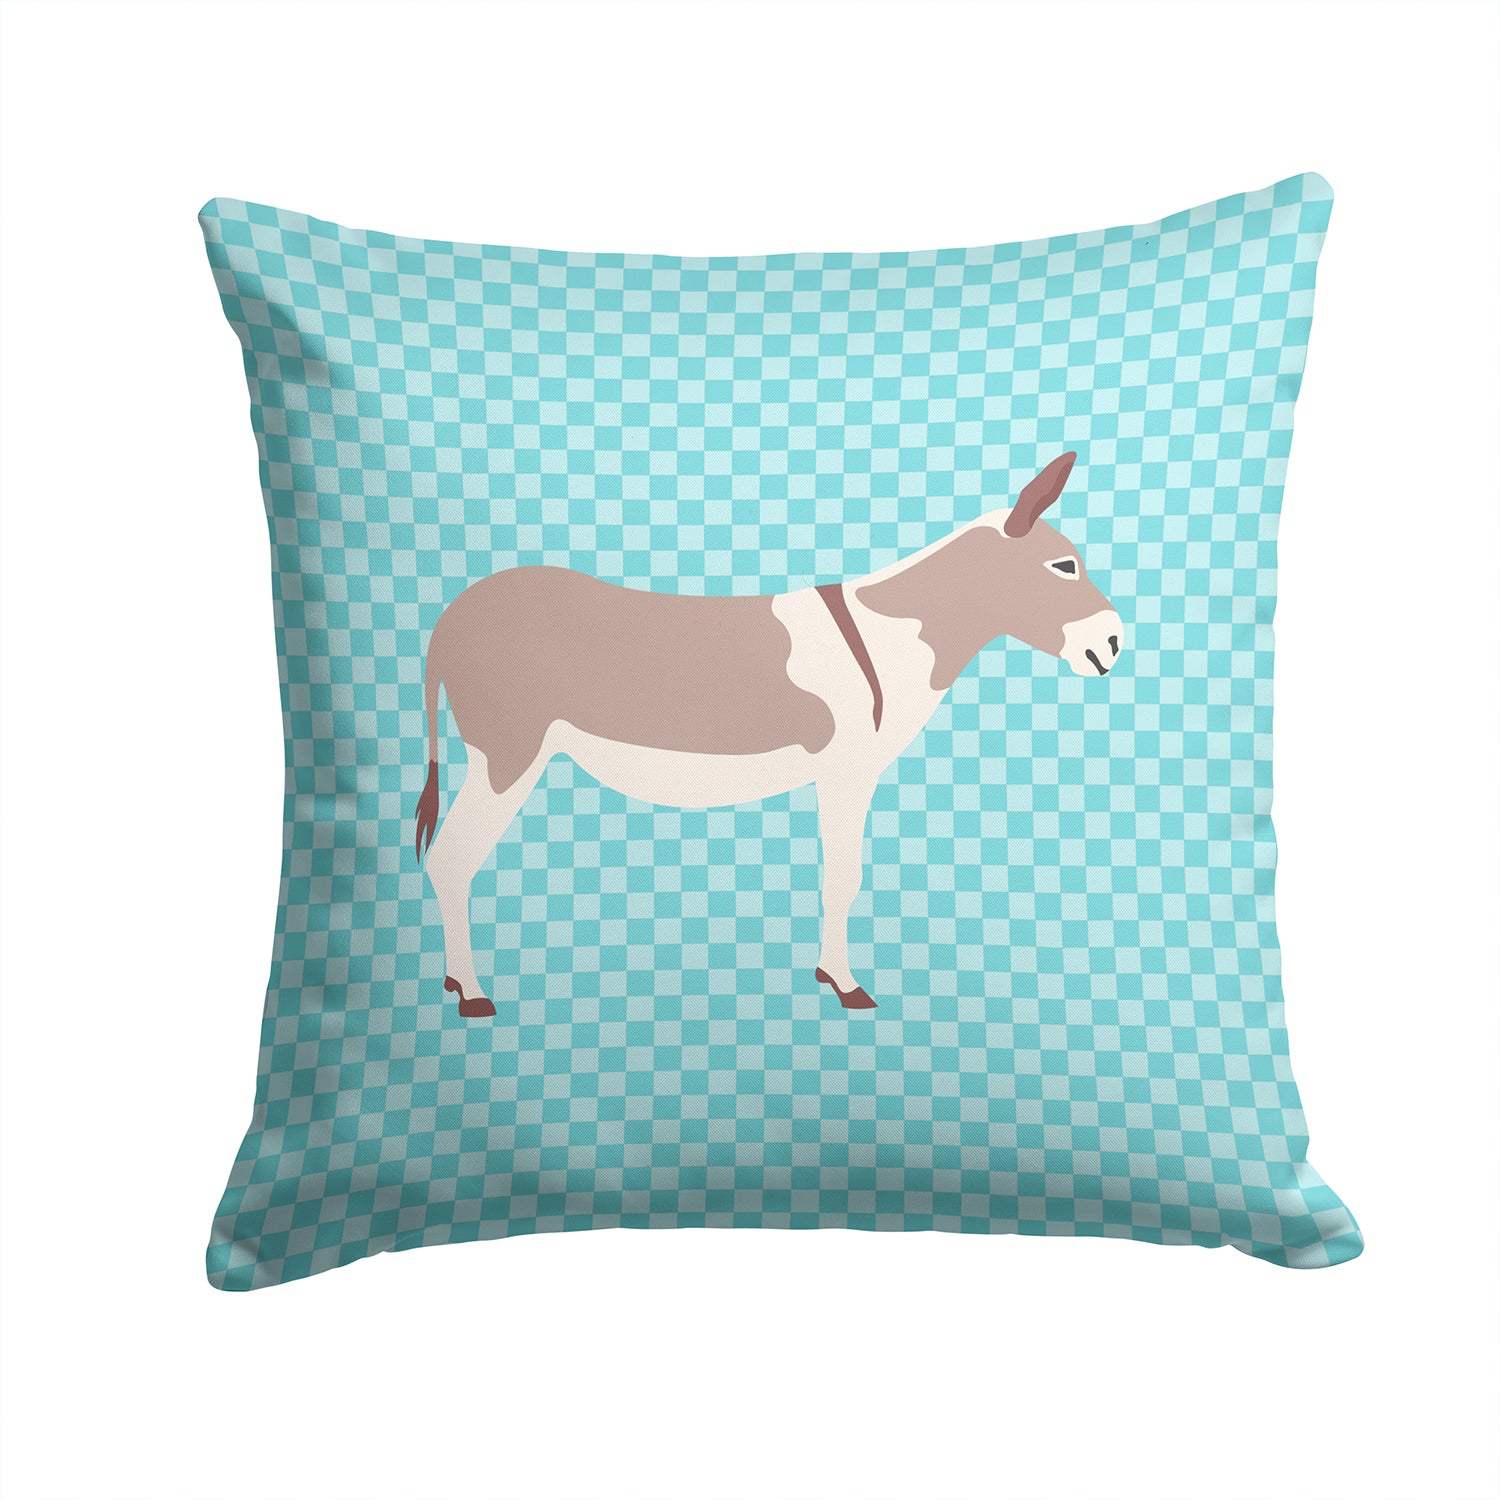 Australian Teamster Donkey Blue Check Fabric Decorative Pillow BB8020PW1414 - the-store.com